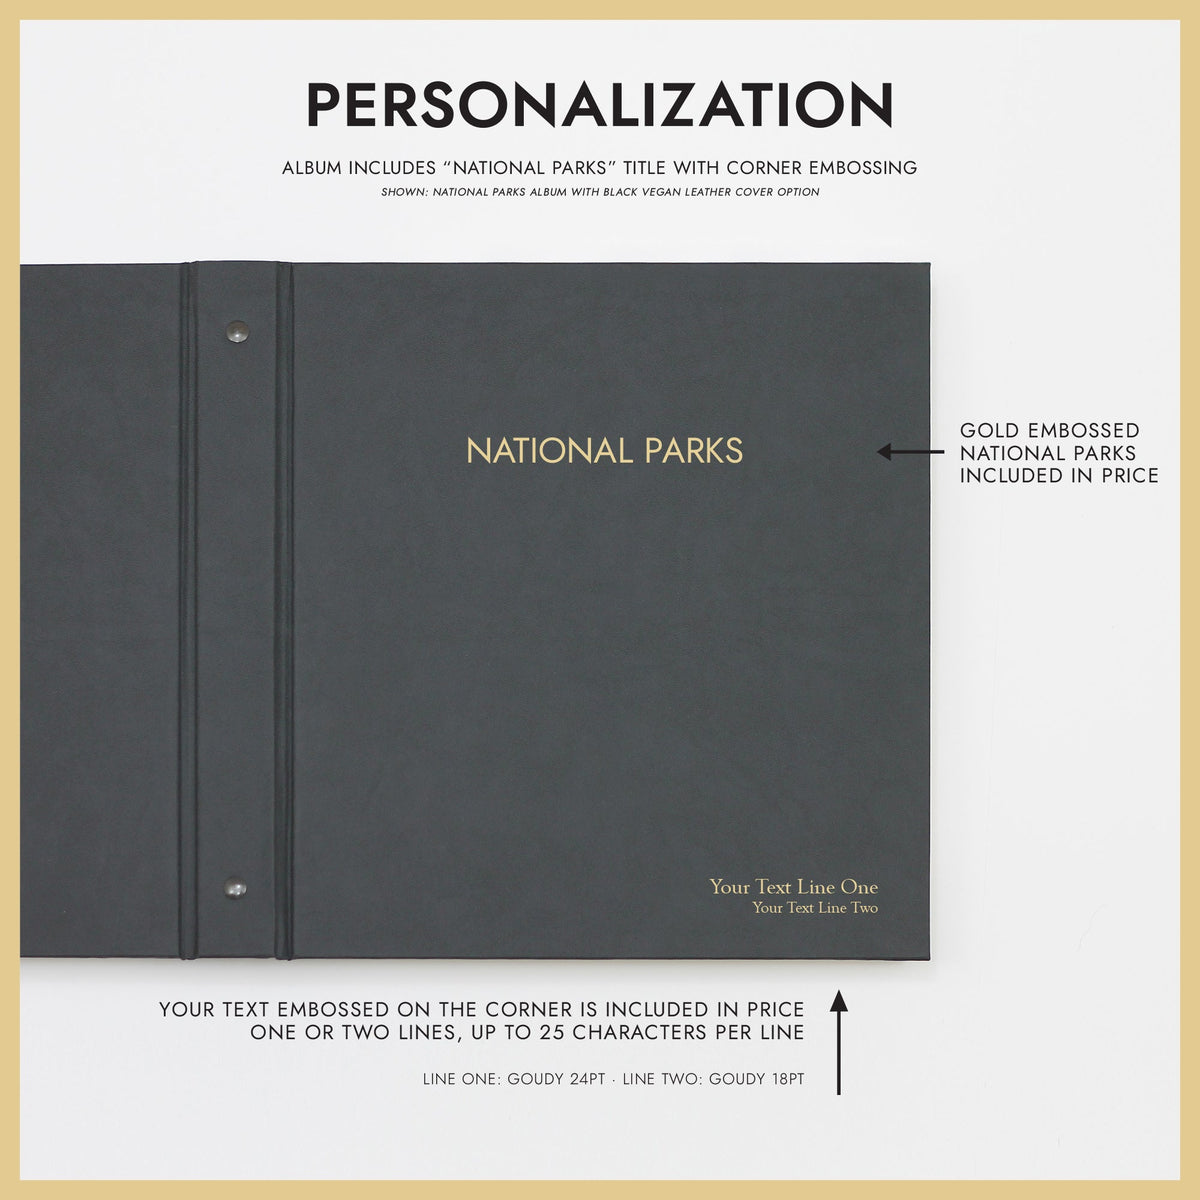 National Parks Album | Cover: Moss Vegan Leather | Available Personalized